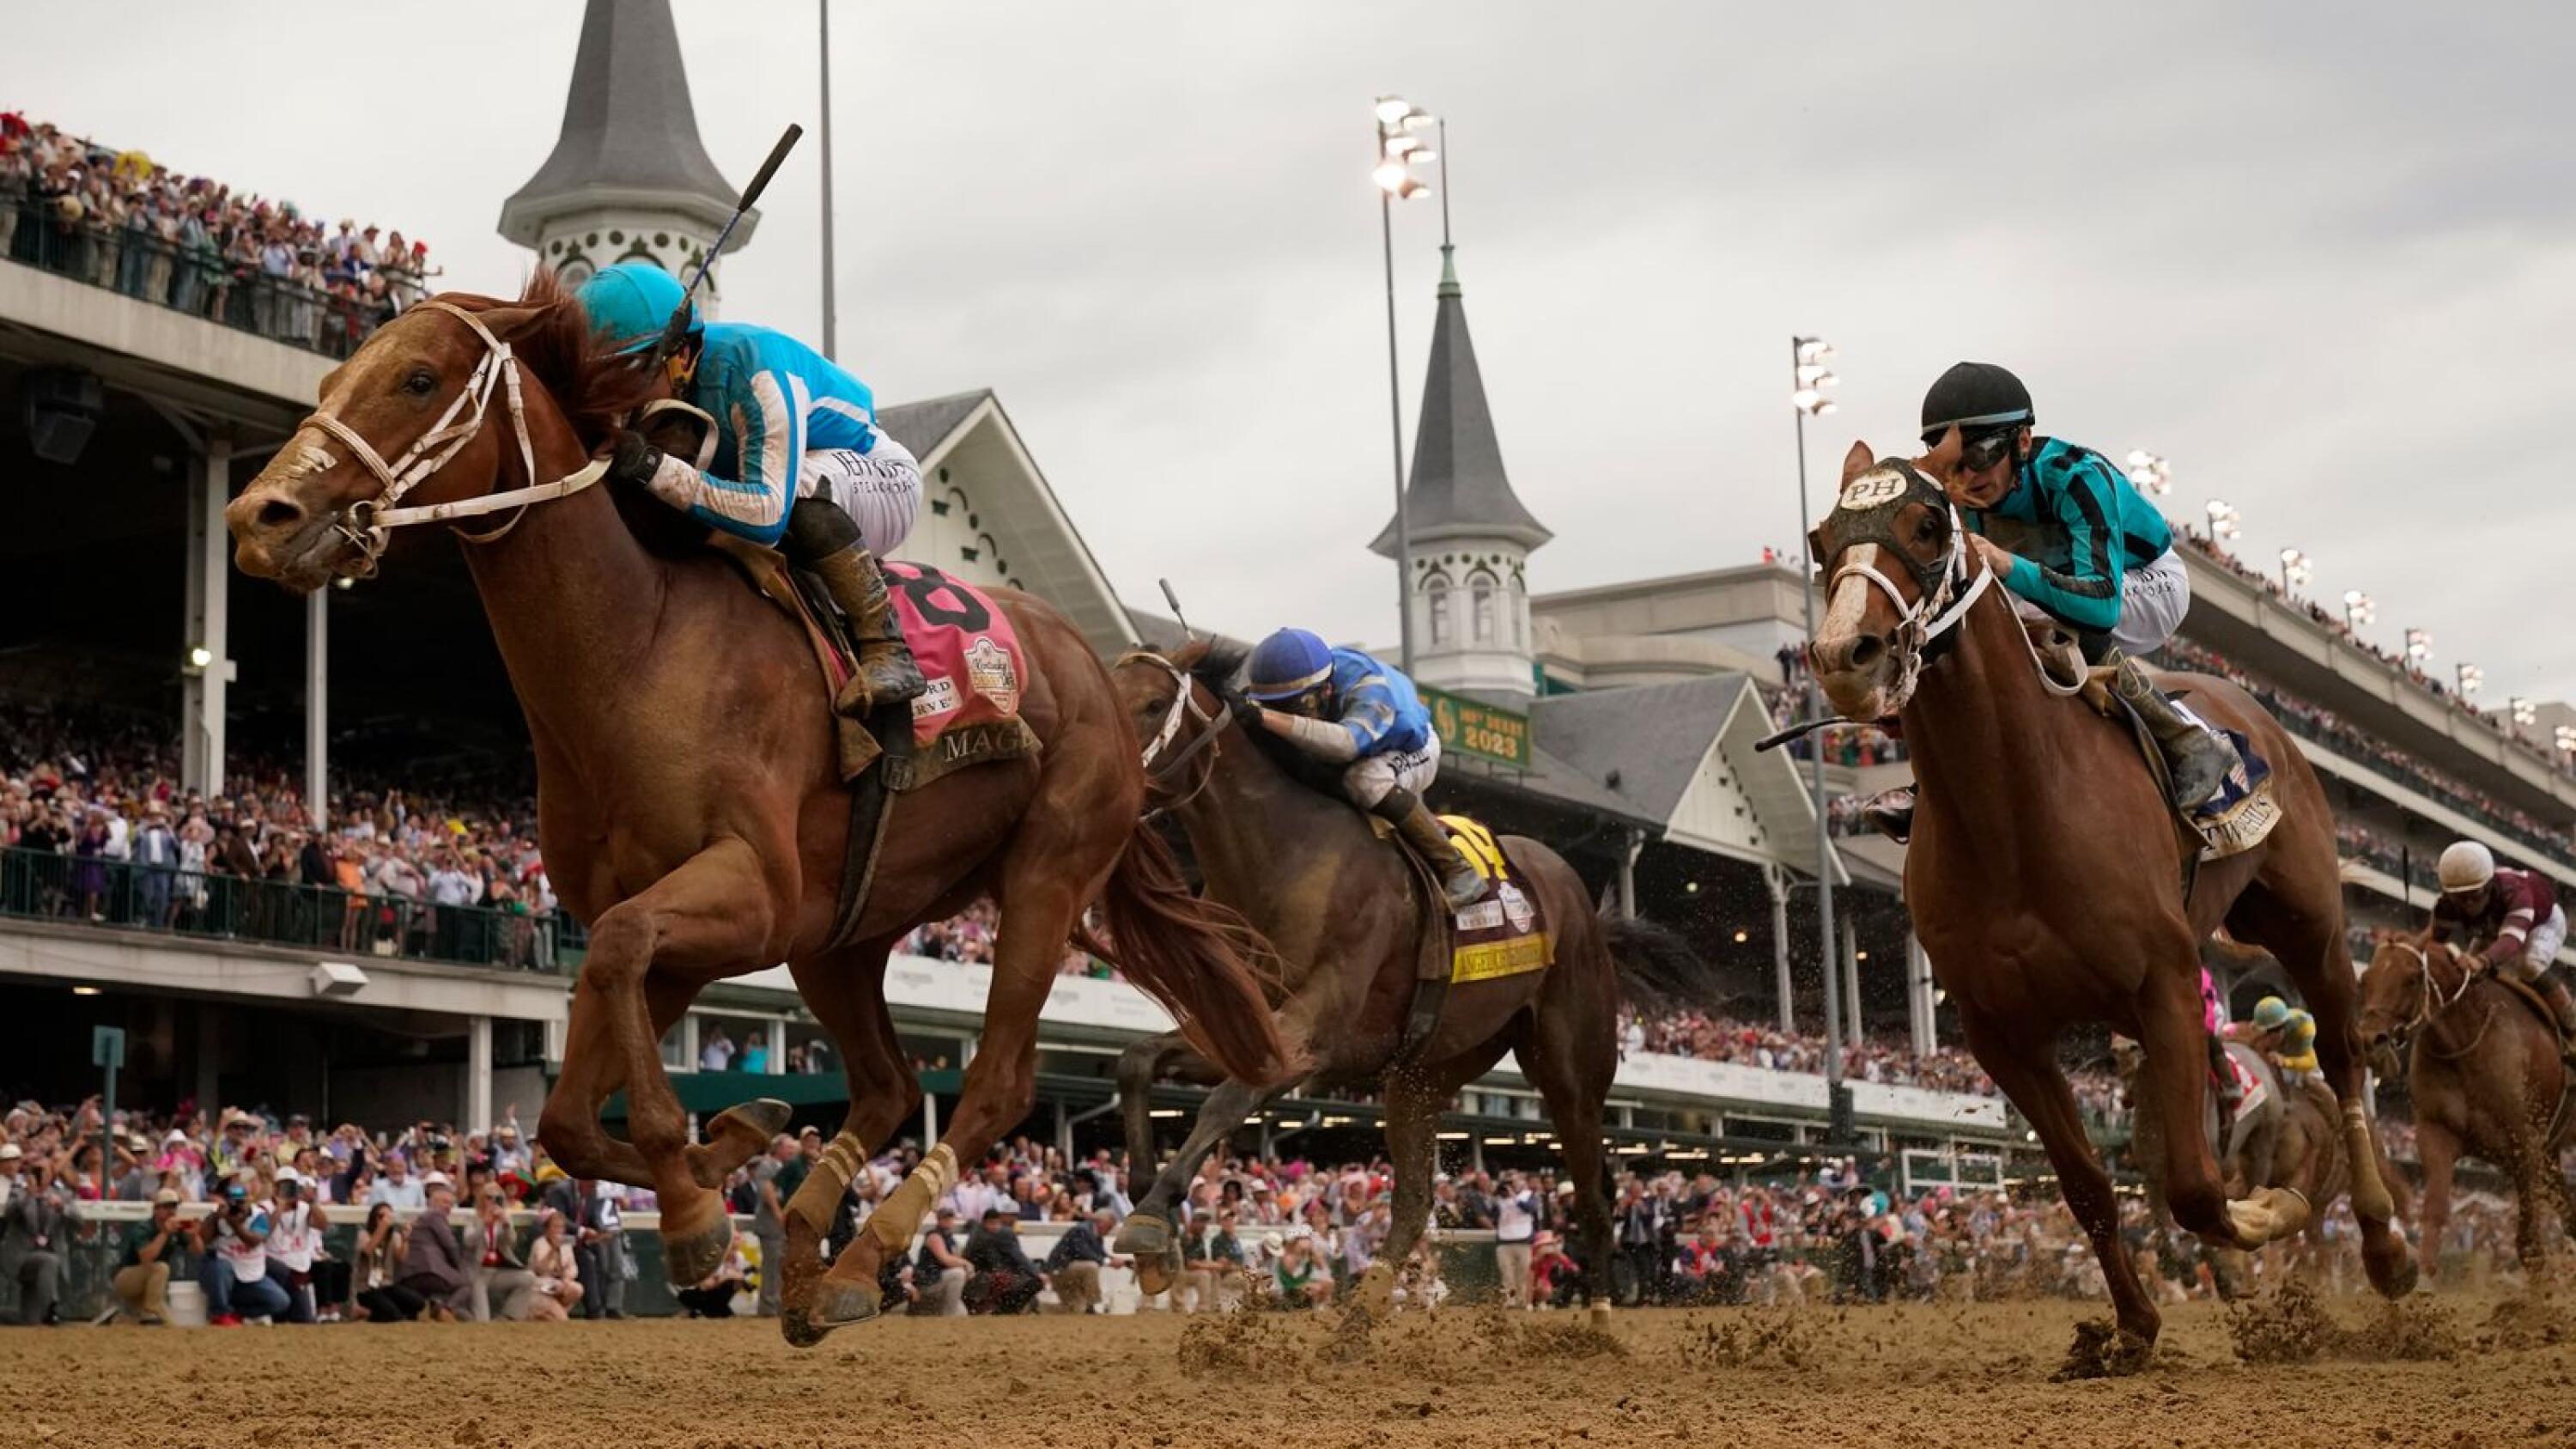 Mage wins starcrossed Kentucky Derby amid 7th death